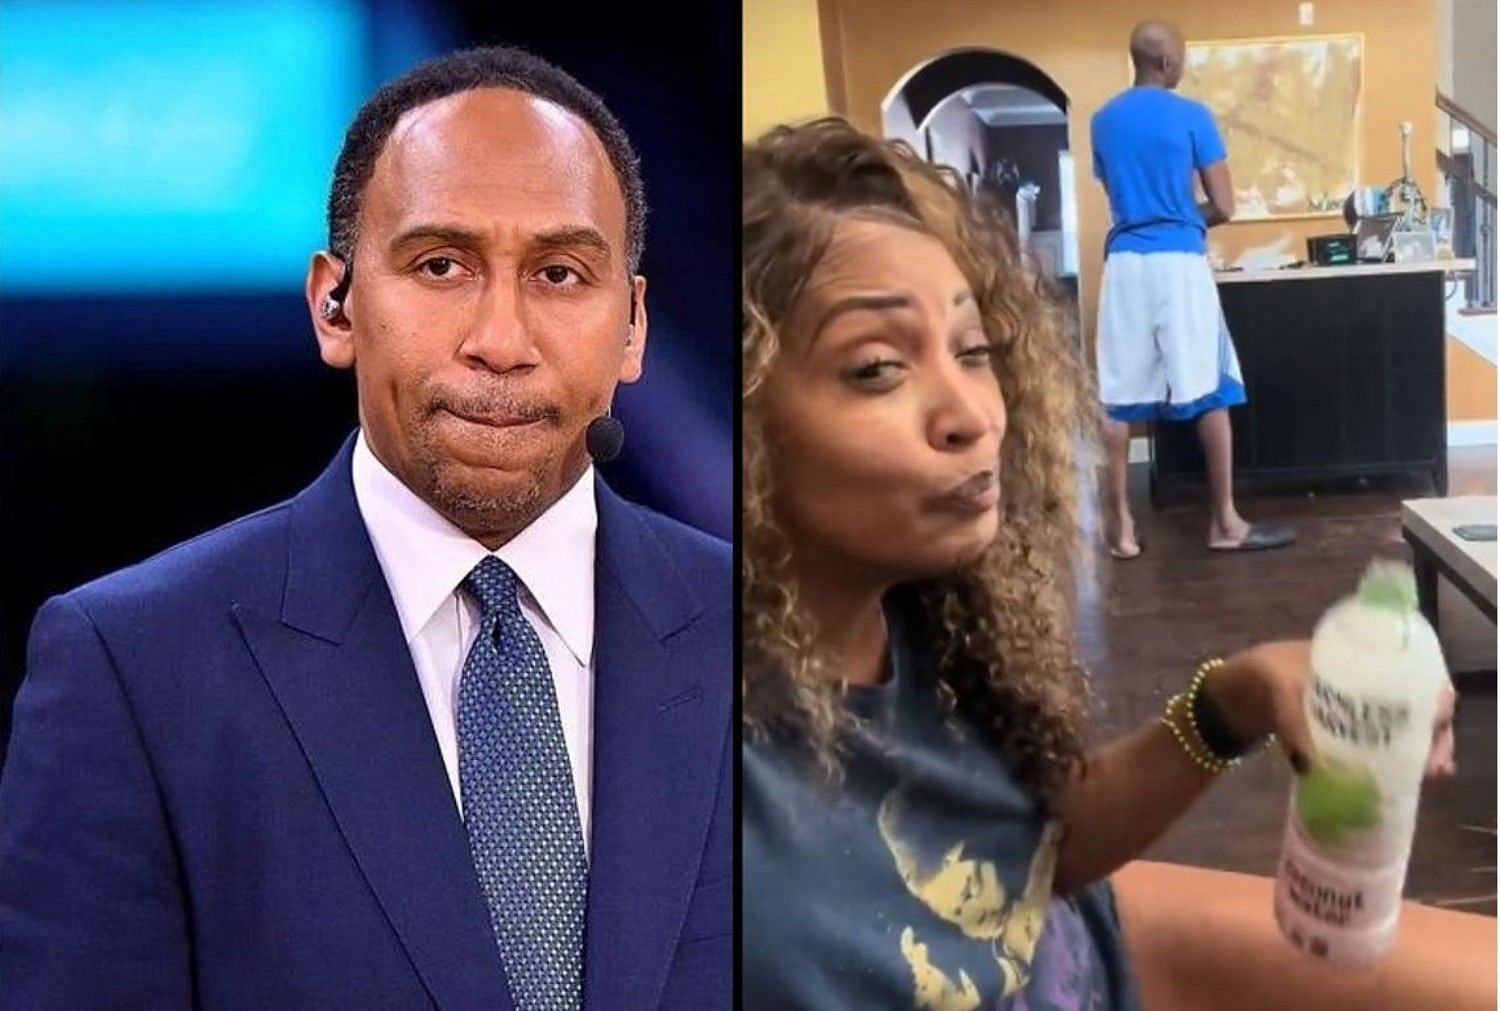 Stephen A. Smith (L) is furious over how the issue involving former NBA player Joe Smith and his partner had to be shared on social media.